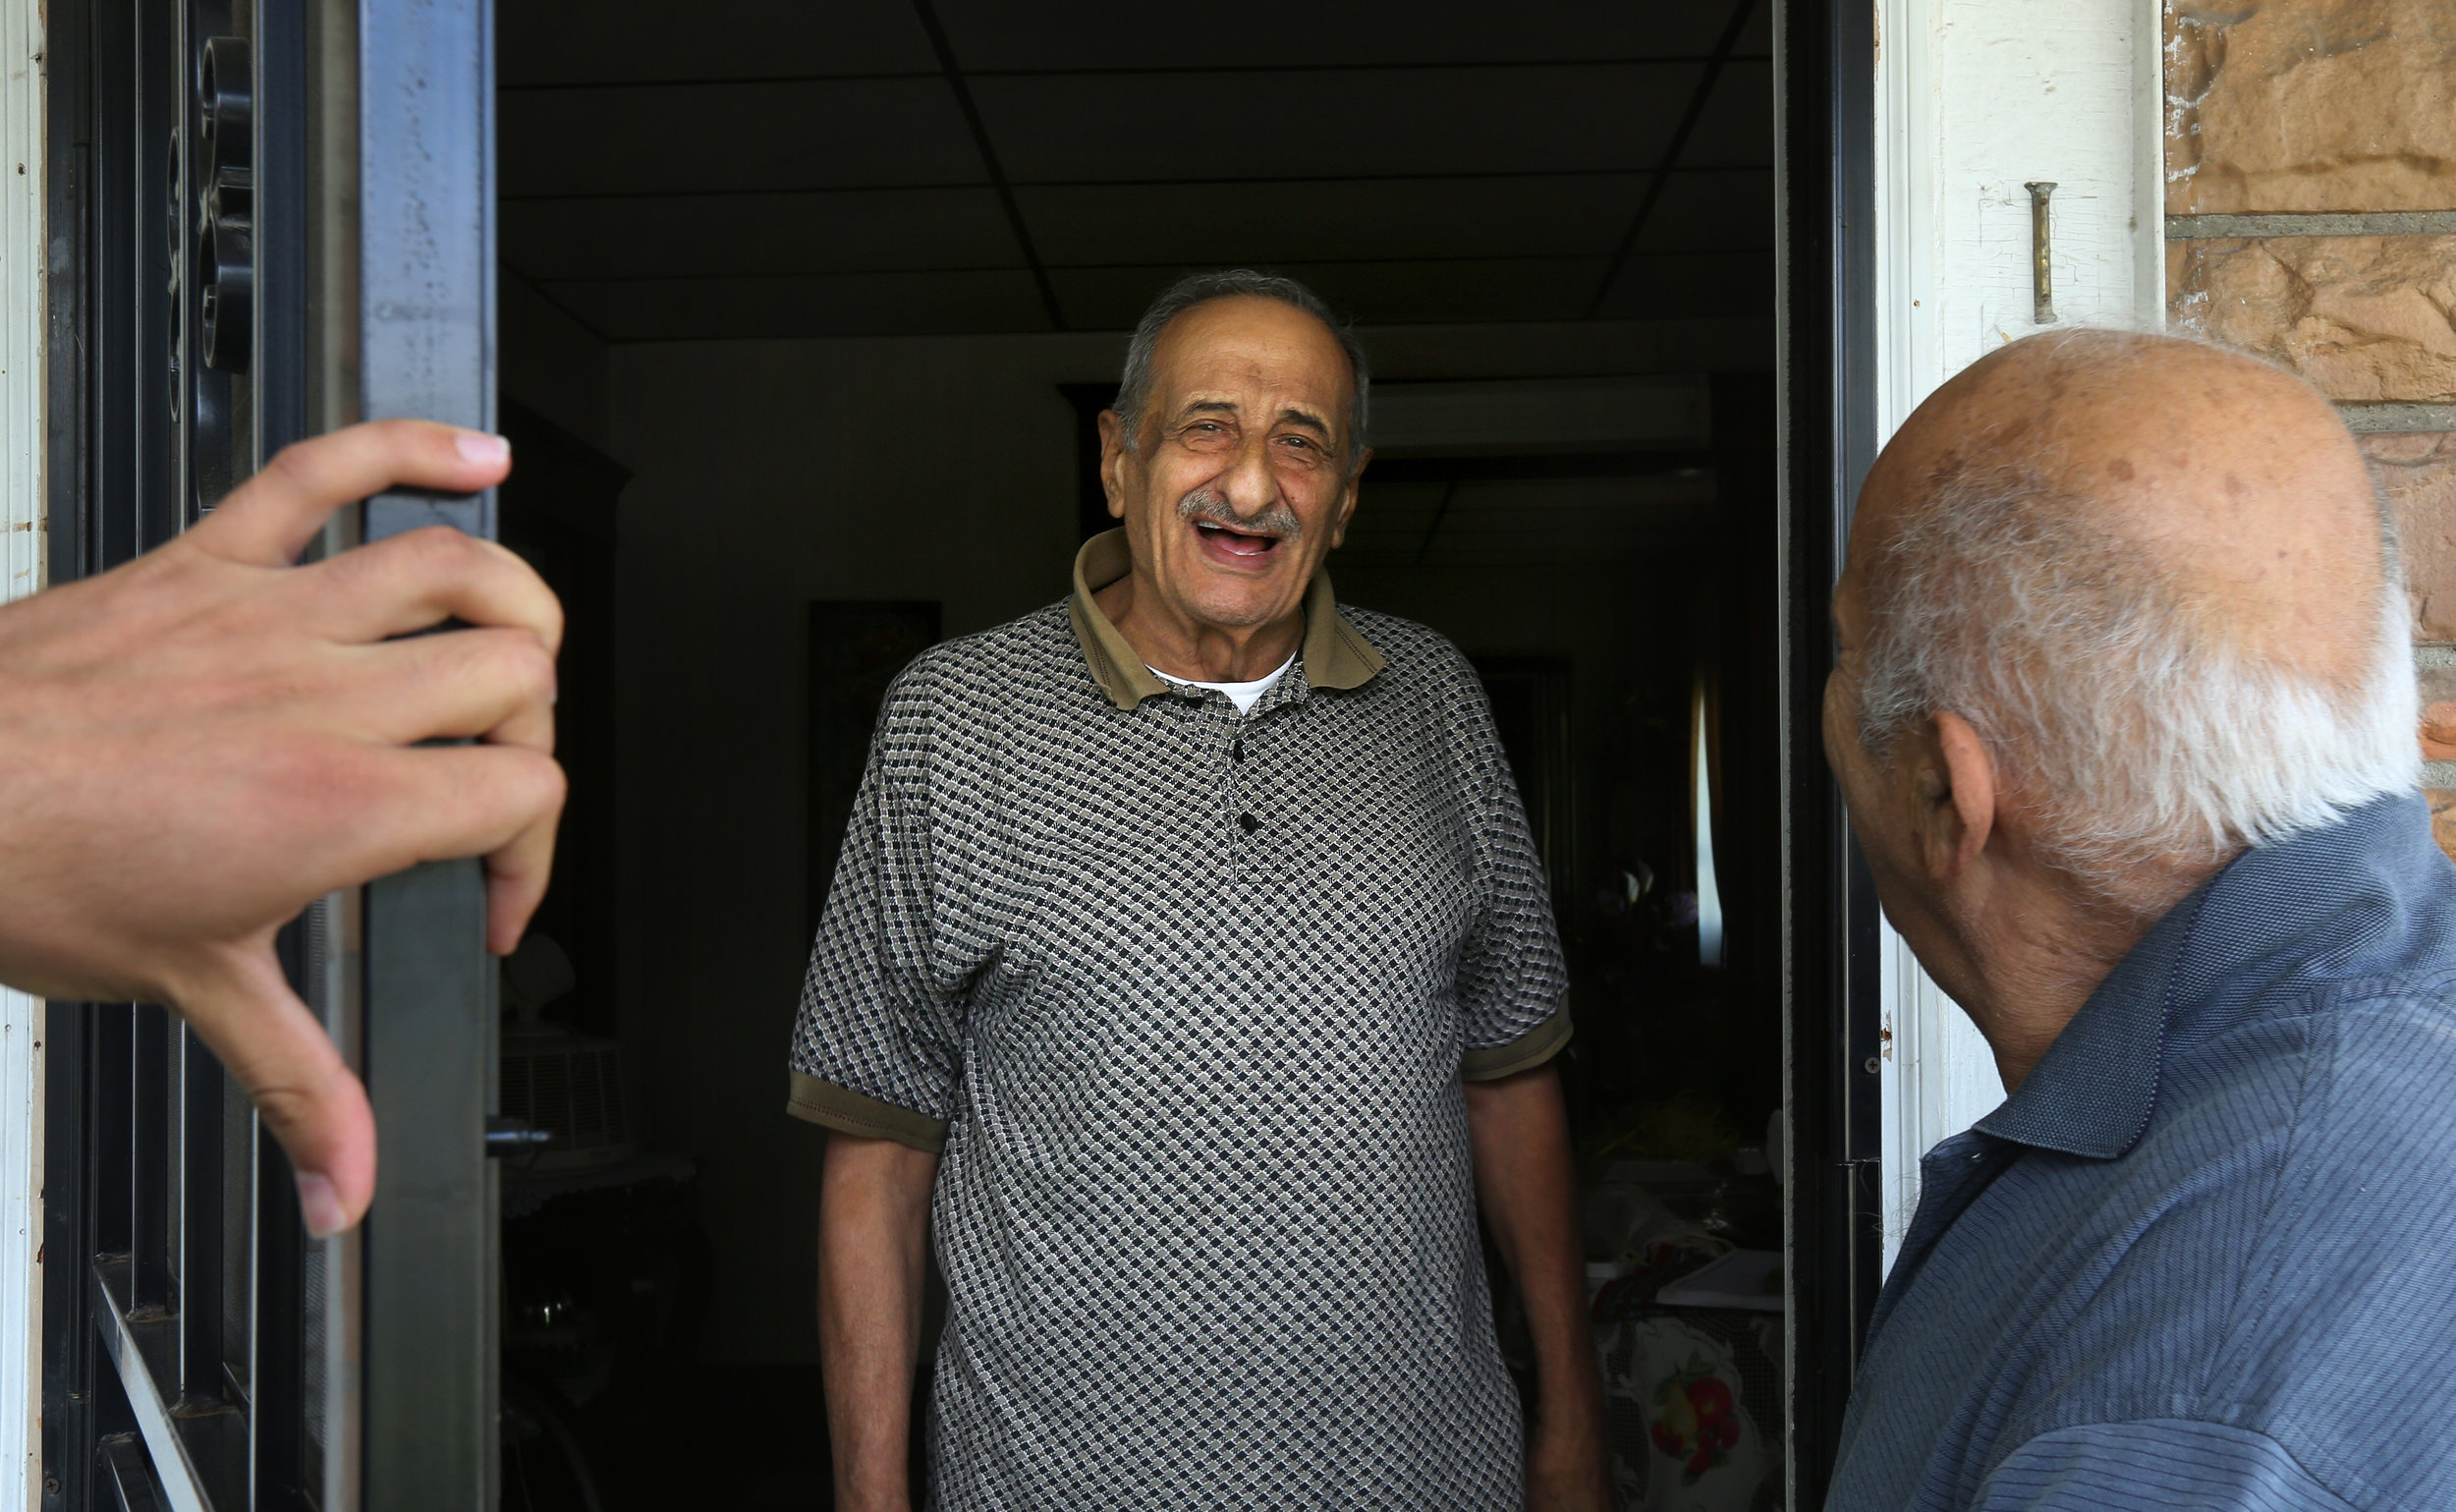  Toufic Awada, 81, center, greets his cousin Hassan Cheaib, right, at his home in Toledo's North End. Mr. Awada said he left Lebanon because of its conflicts. He now lives next door to Mr. Cheaib, with both families counting themselves as two of the 